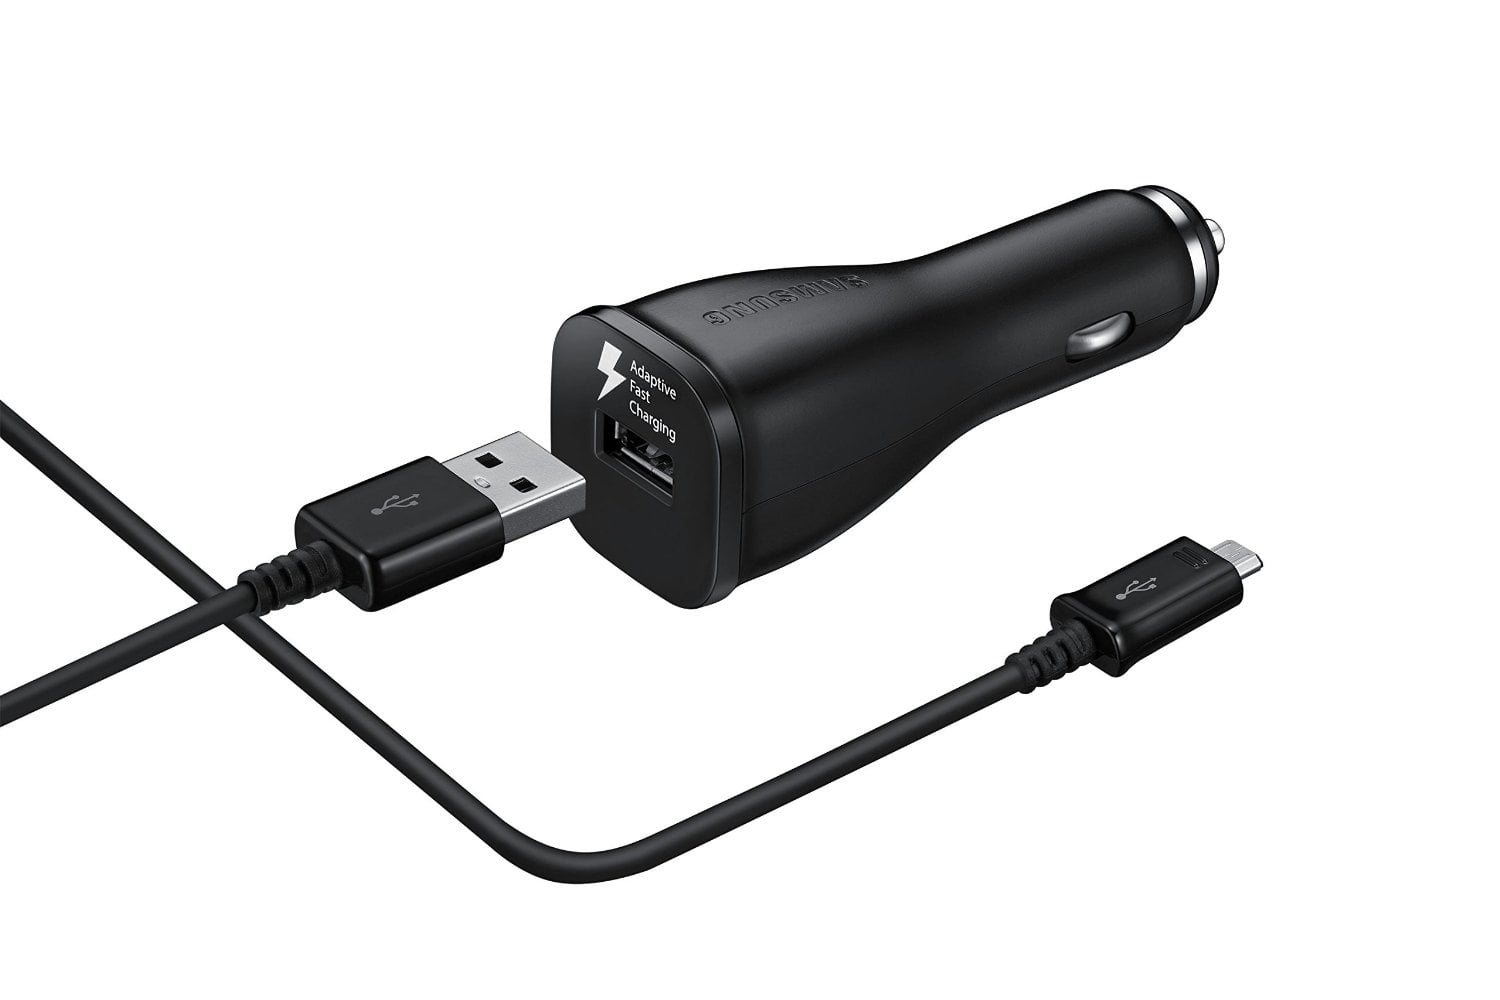 Genuine Charging 1A Wall Kit Upgrade Works with ZTE Axon Elite as a Replacement Plus Detachable Hi-Power MicroUSB 2.0 Data Sync Cable! Black 110-240v